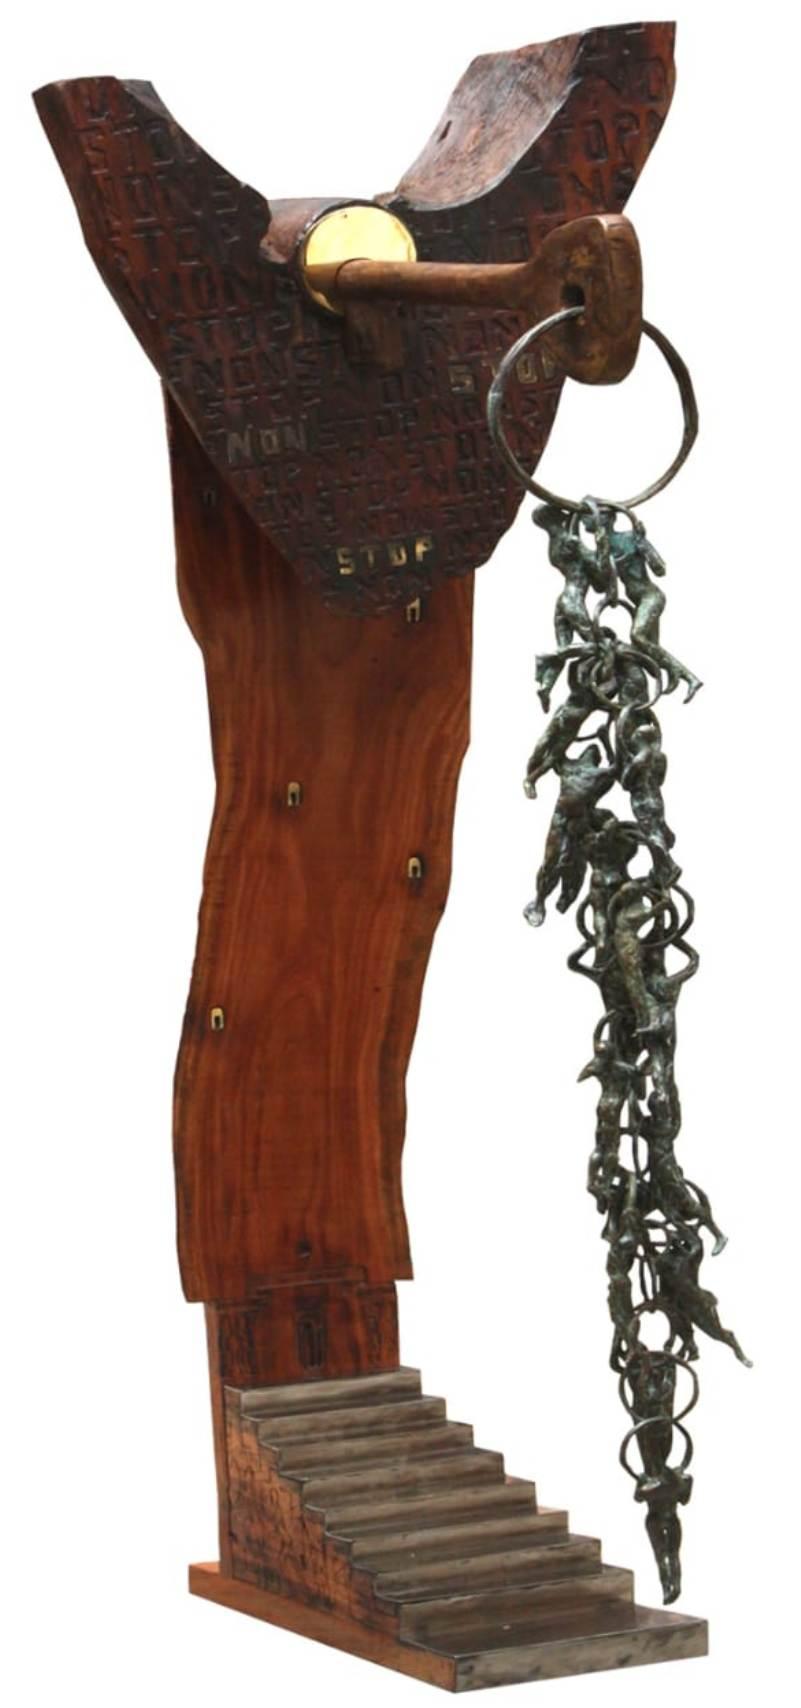 Non-Stop, Figurative, Wood & Bronze by Contemporary Indian Artist "In Stock"